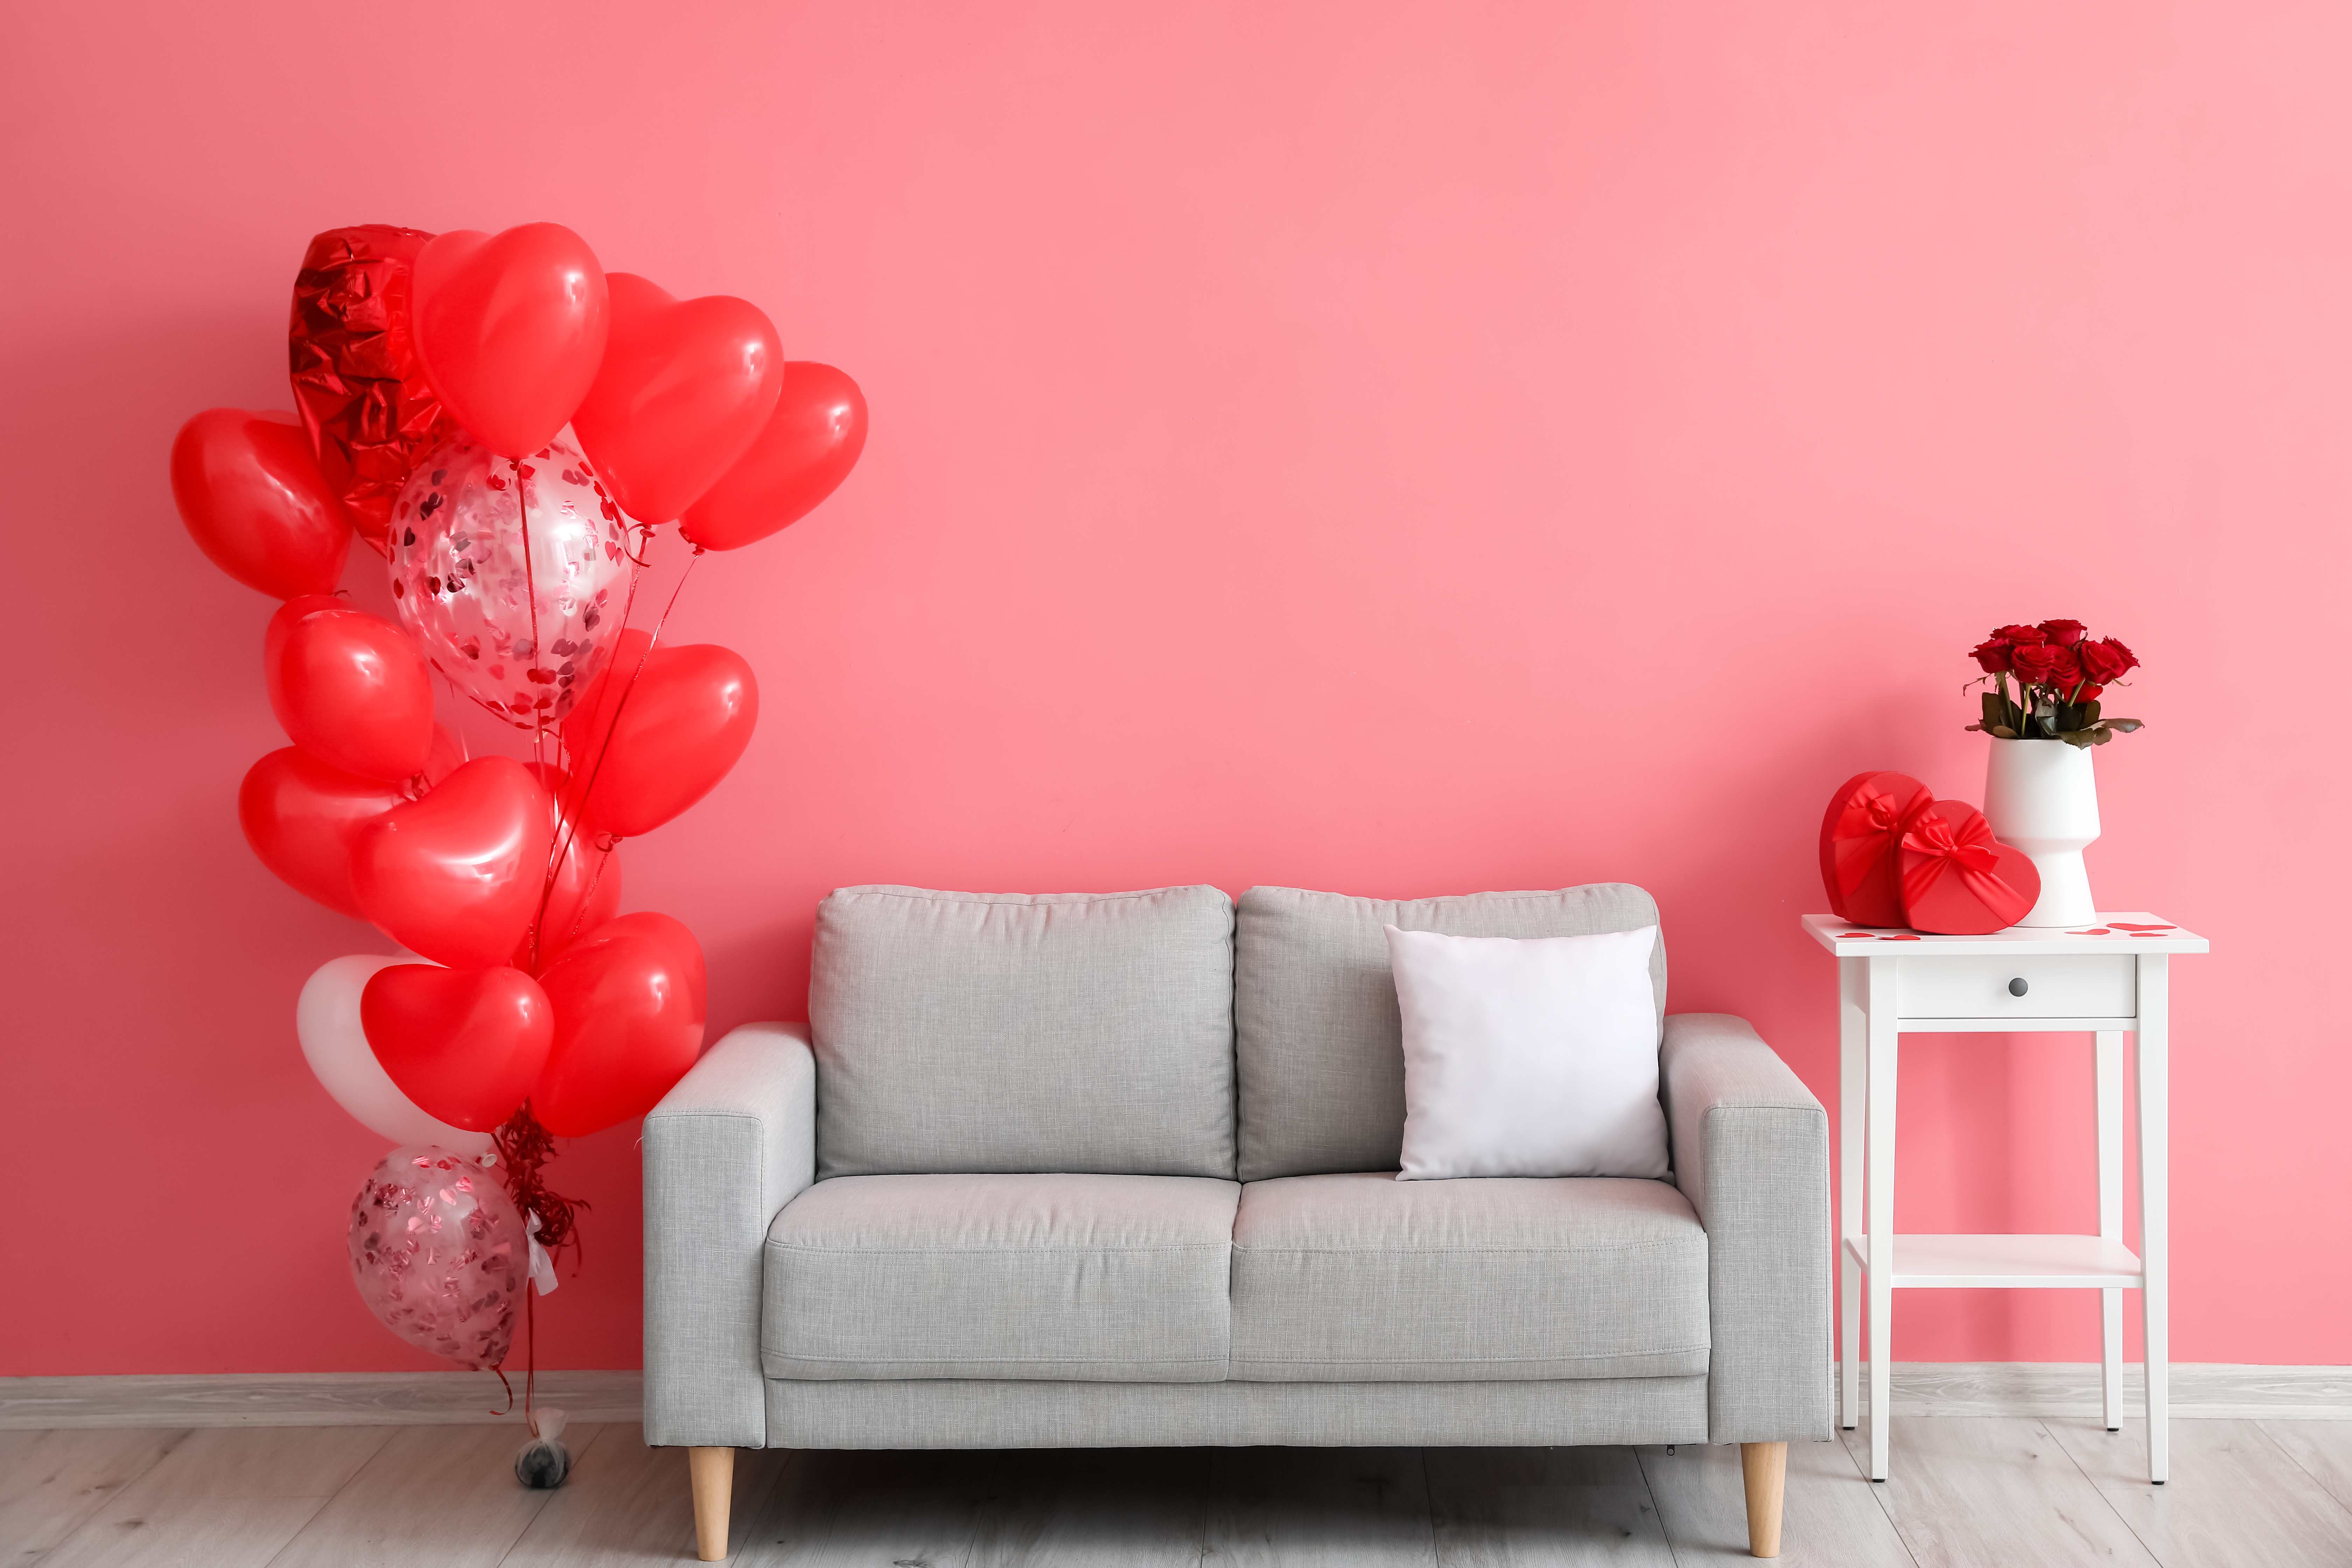 A pink living room is beautifully decorated for Valentine’s Day.